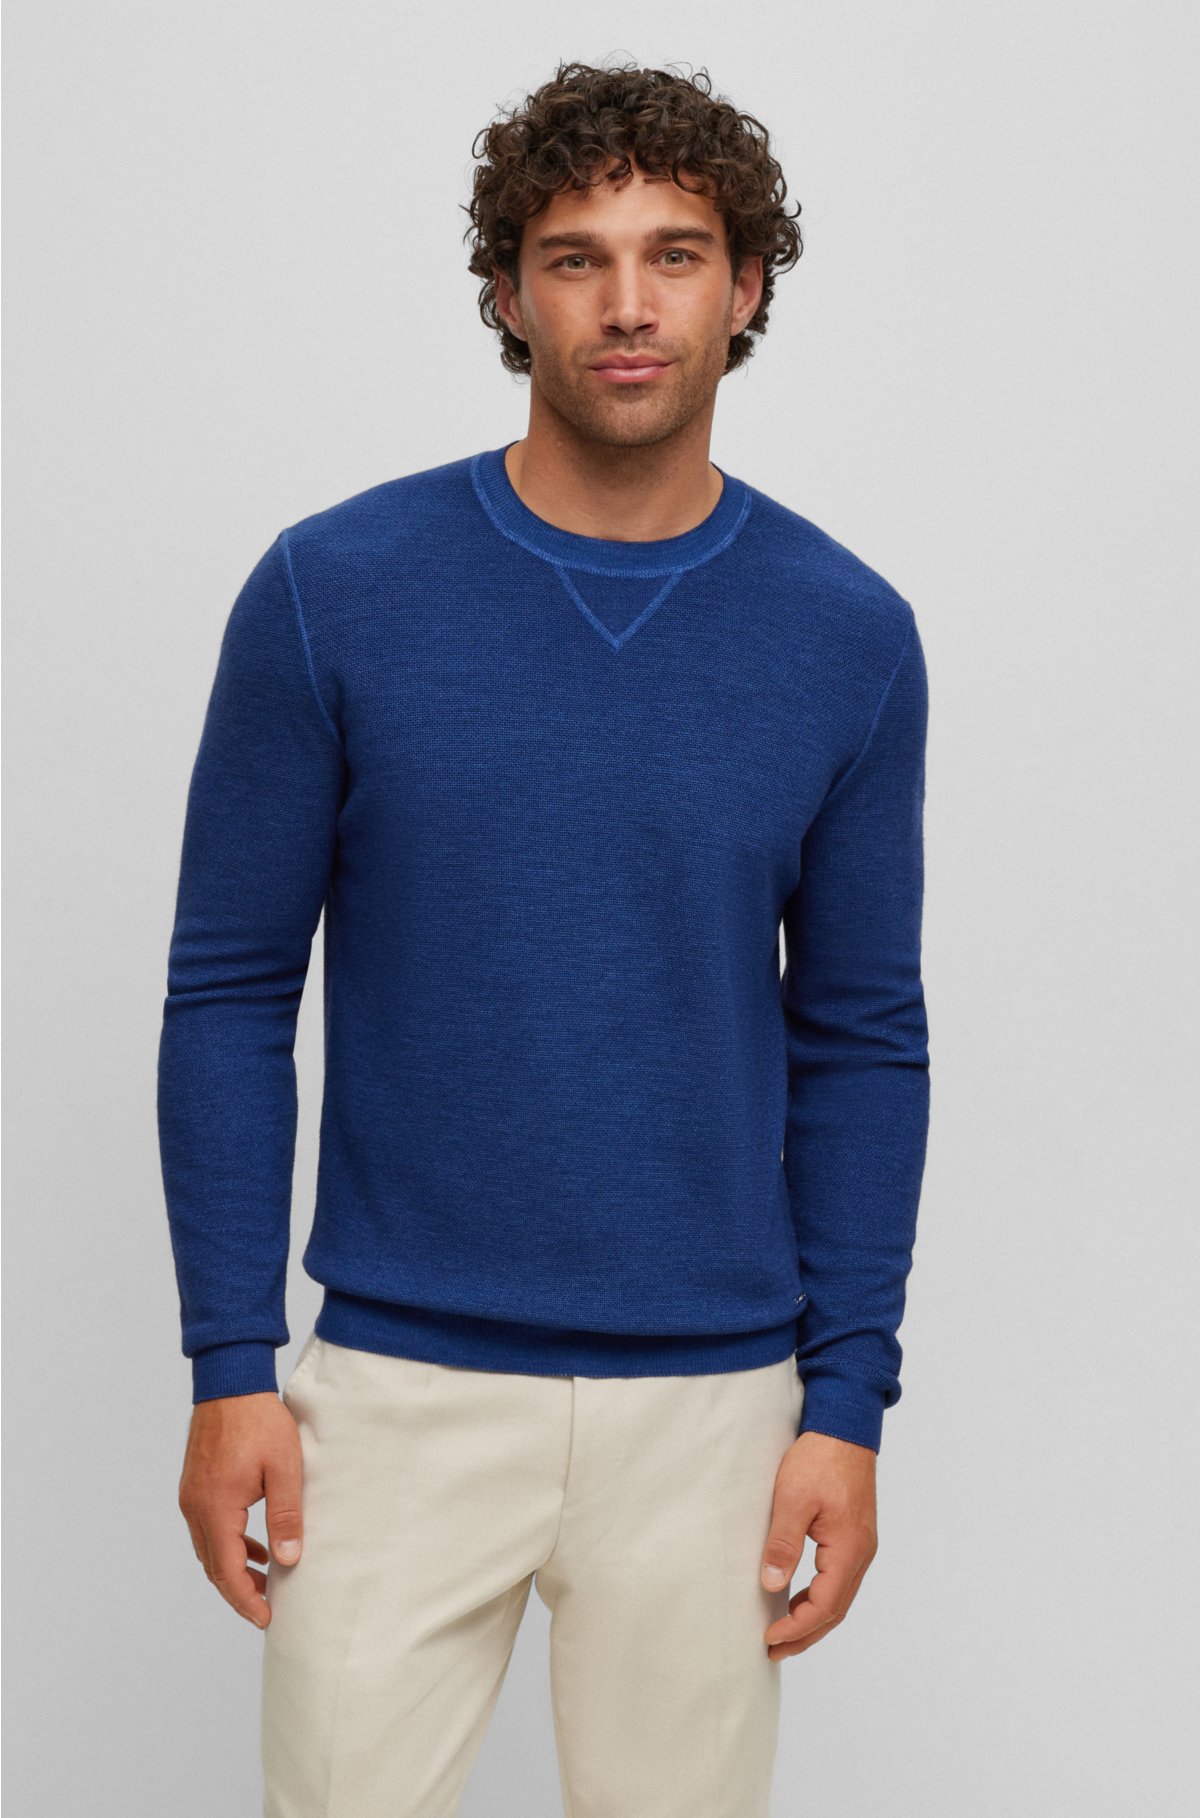 BOSS - Structured-knit sweater in virgin wool, silk and cashmere